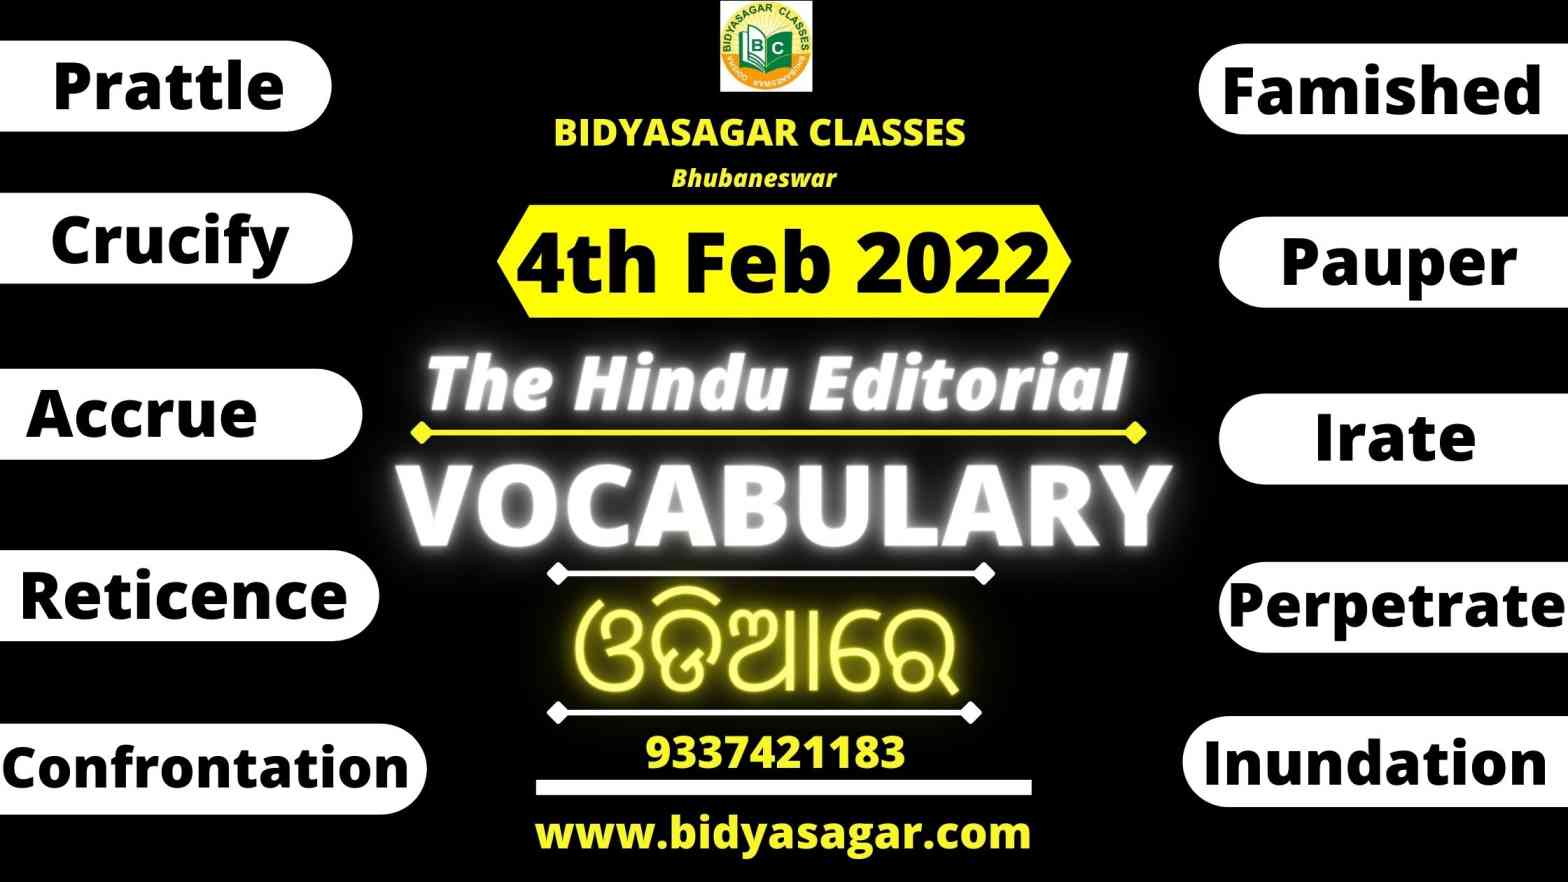 The Hindu Editorial Vocabulary of 4th february 2022